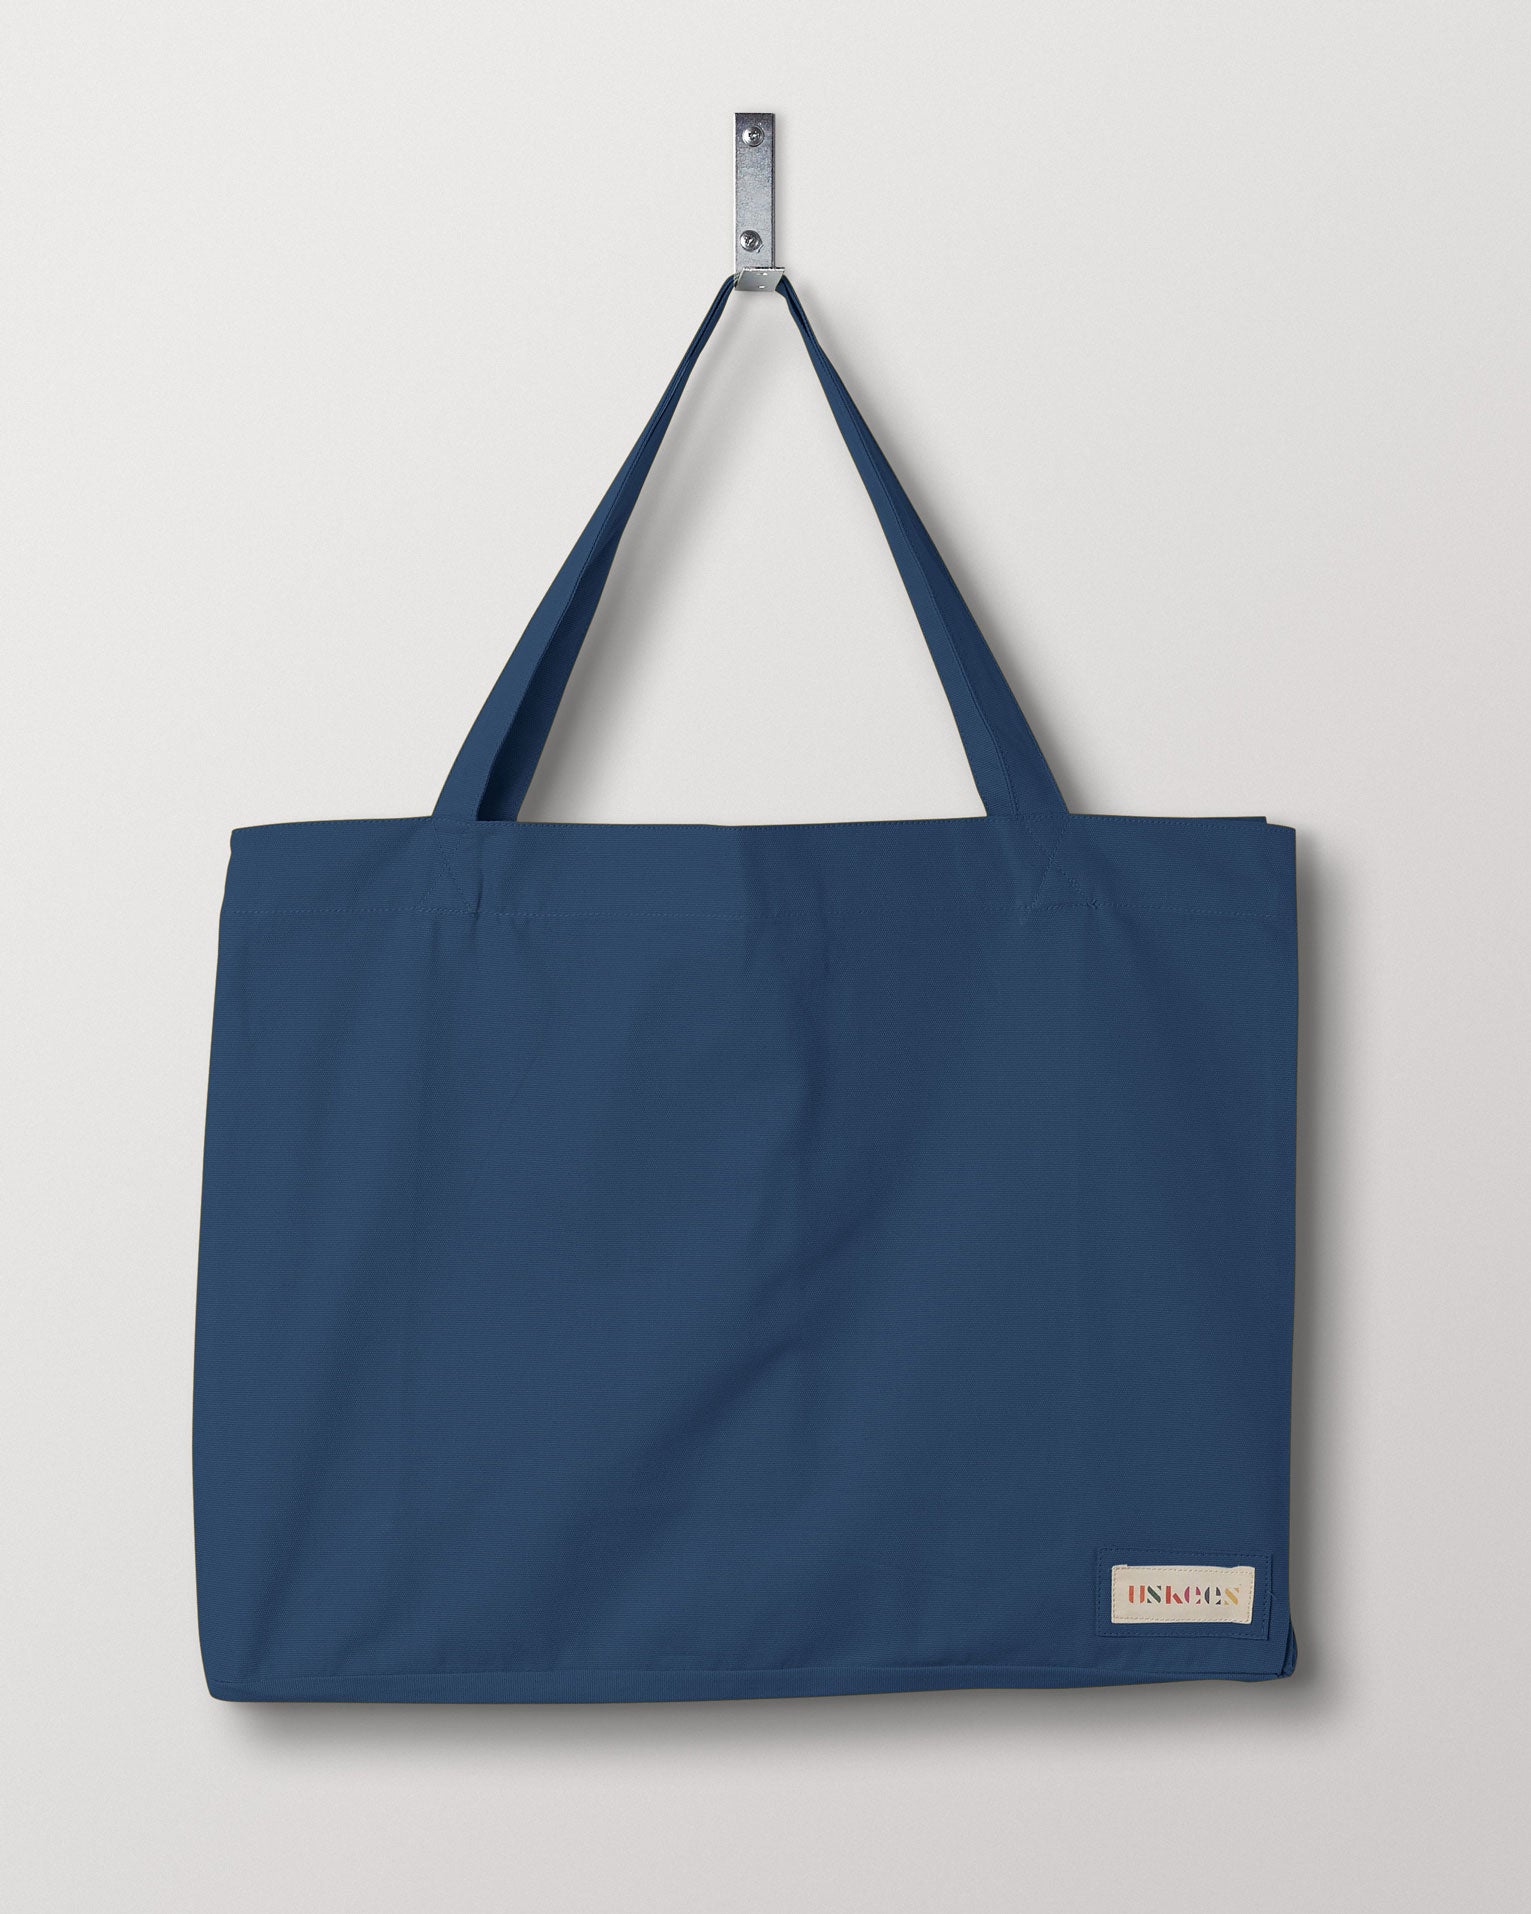 Full front hanging shot of Uskees #4001 large peacock-blue tote bag, showing double handles and Uskees woven logo.